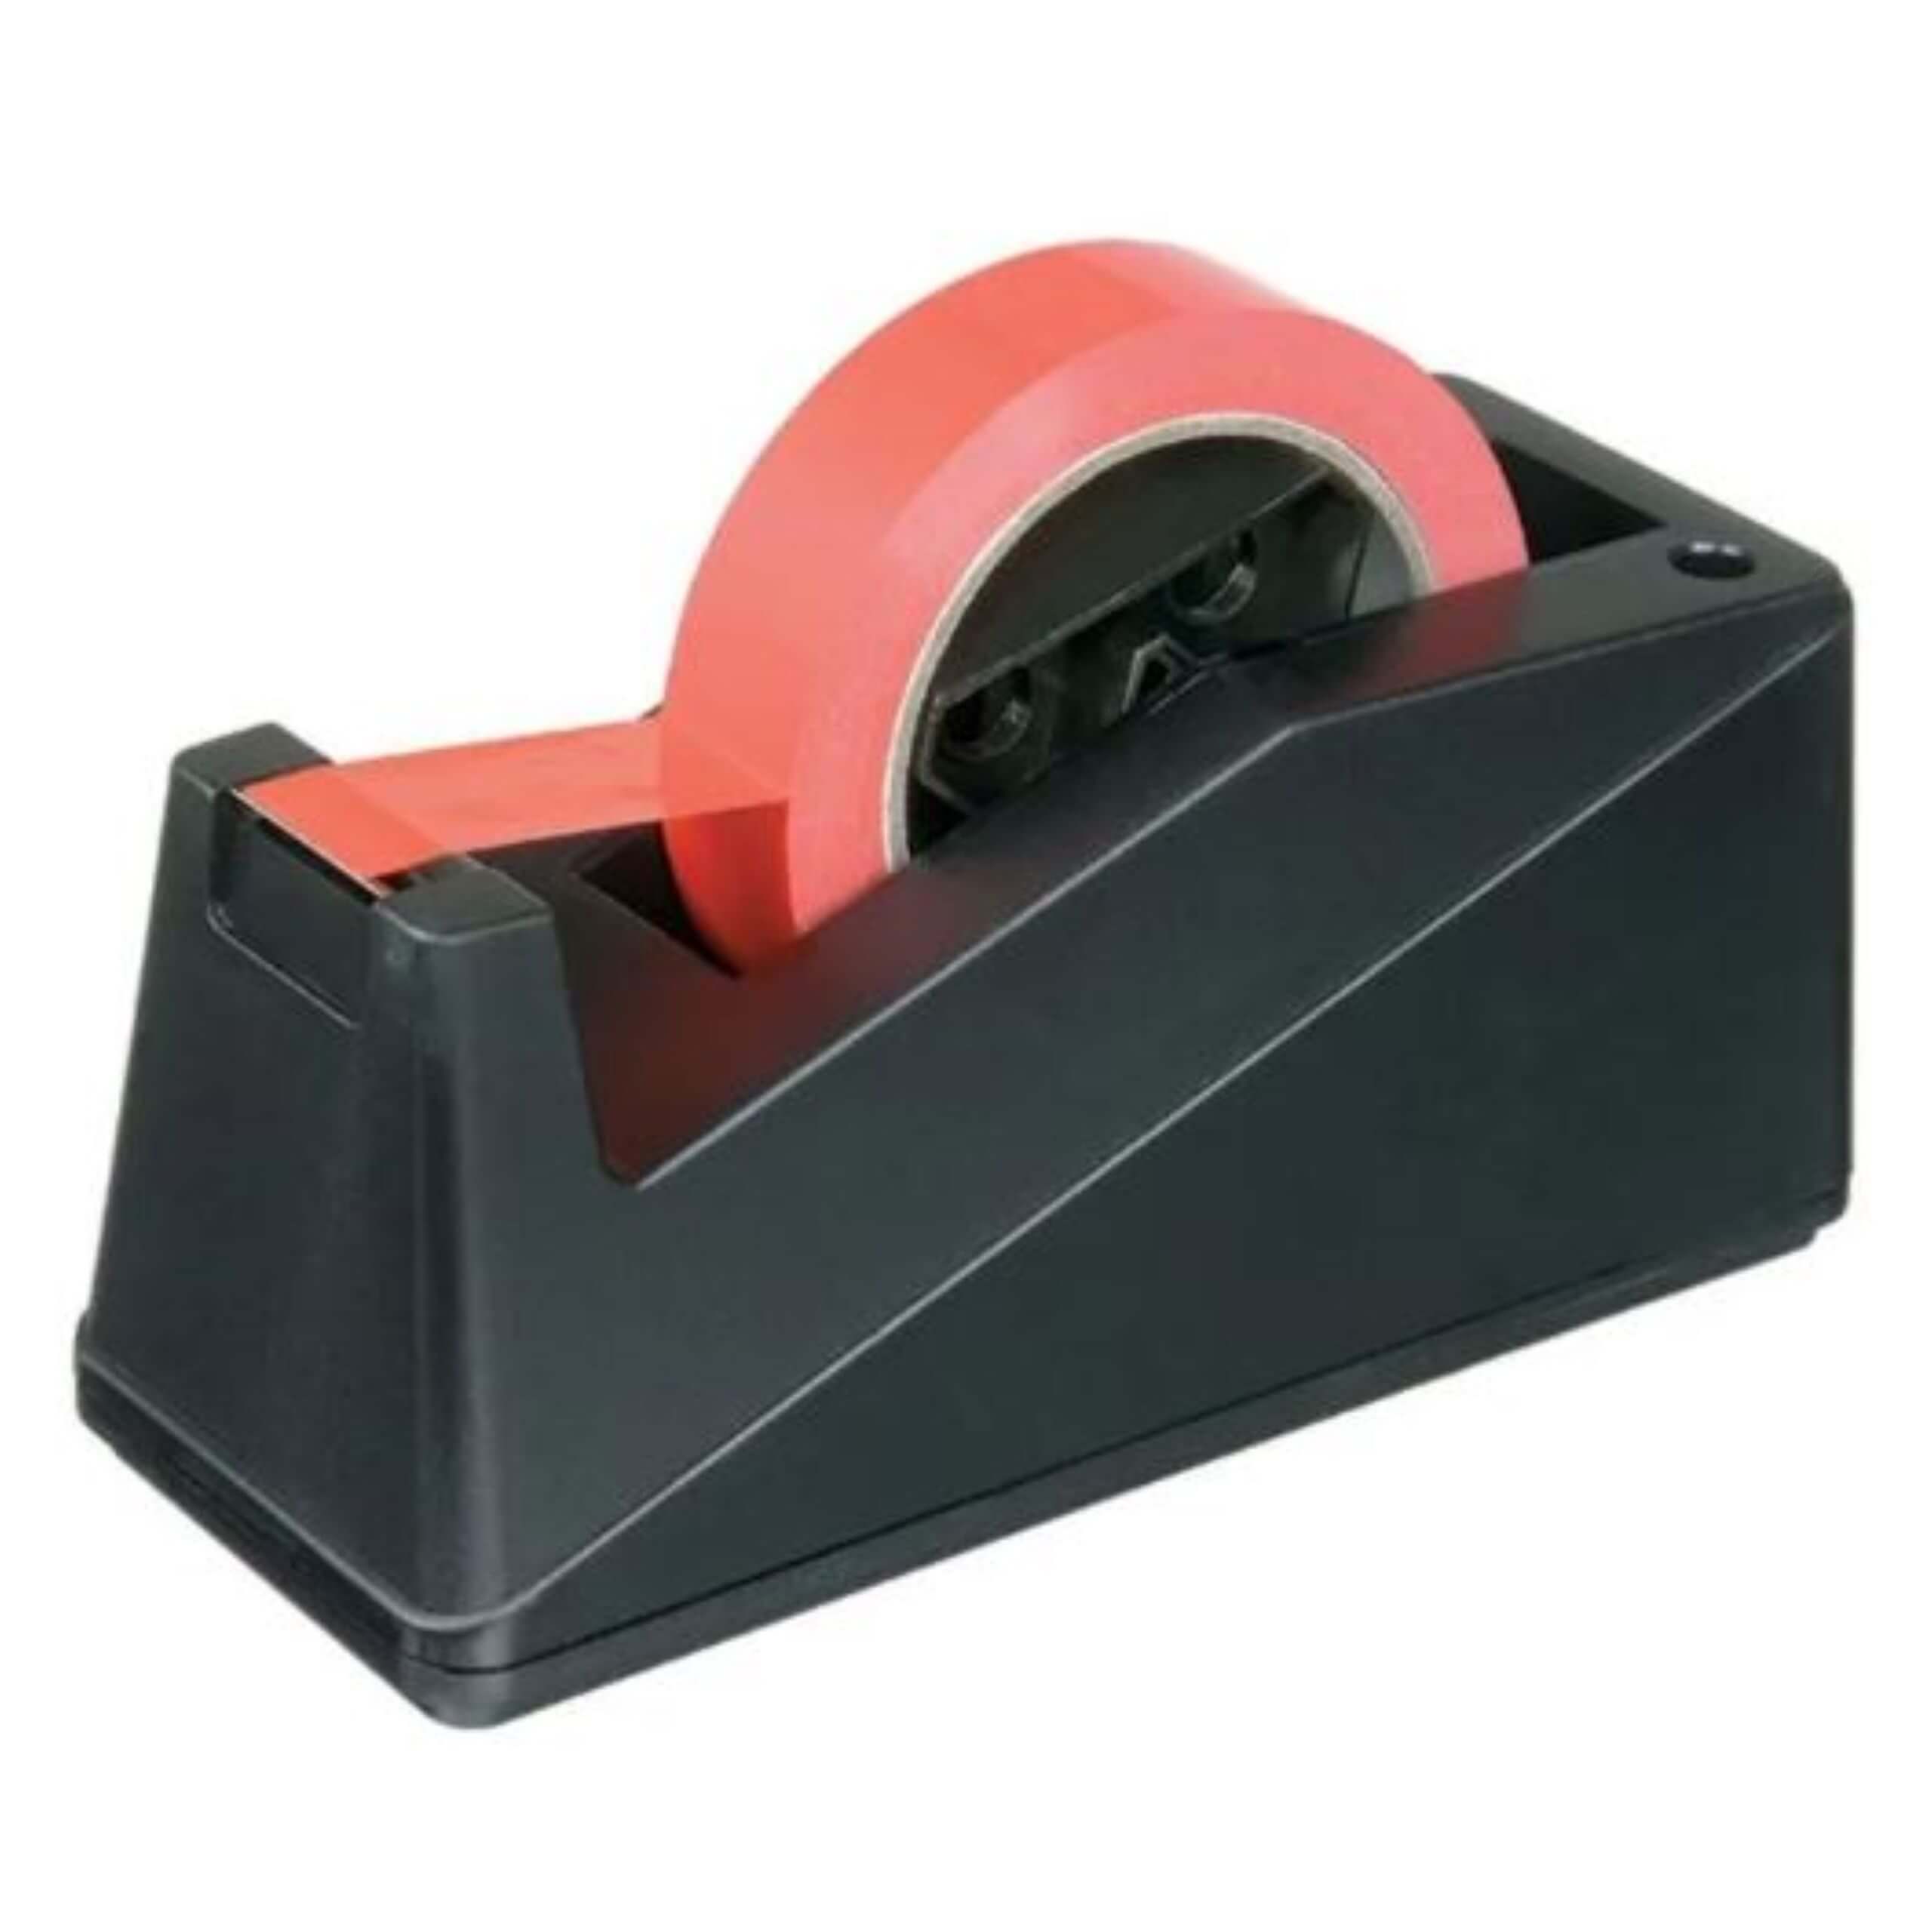 An image of our standard Bench Tape Dispensers.